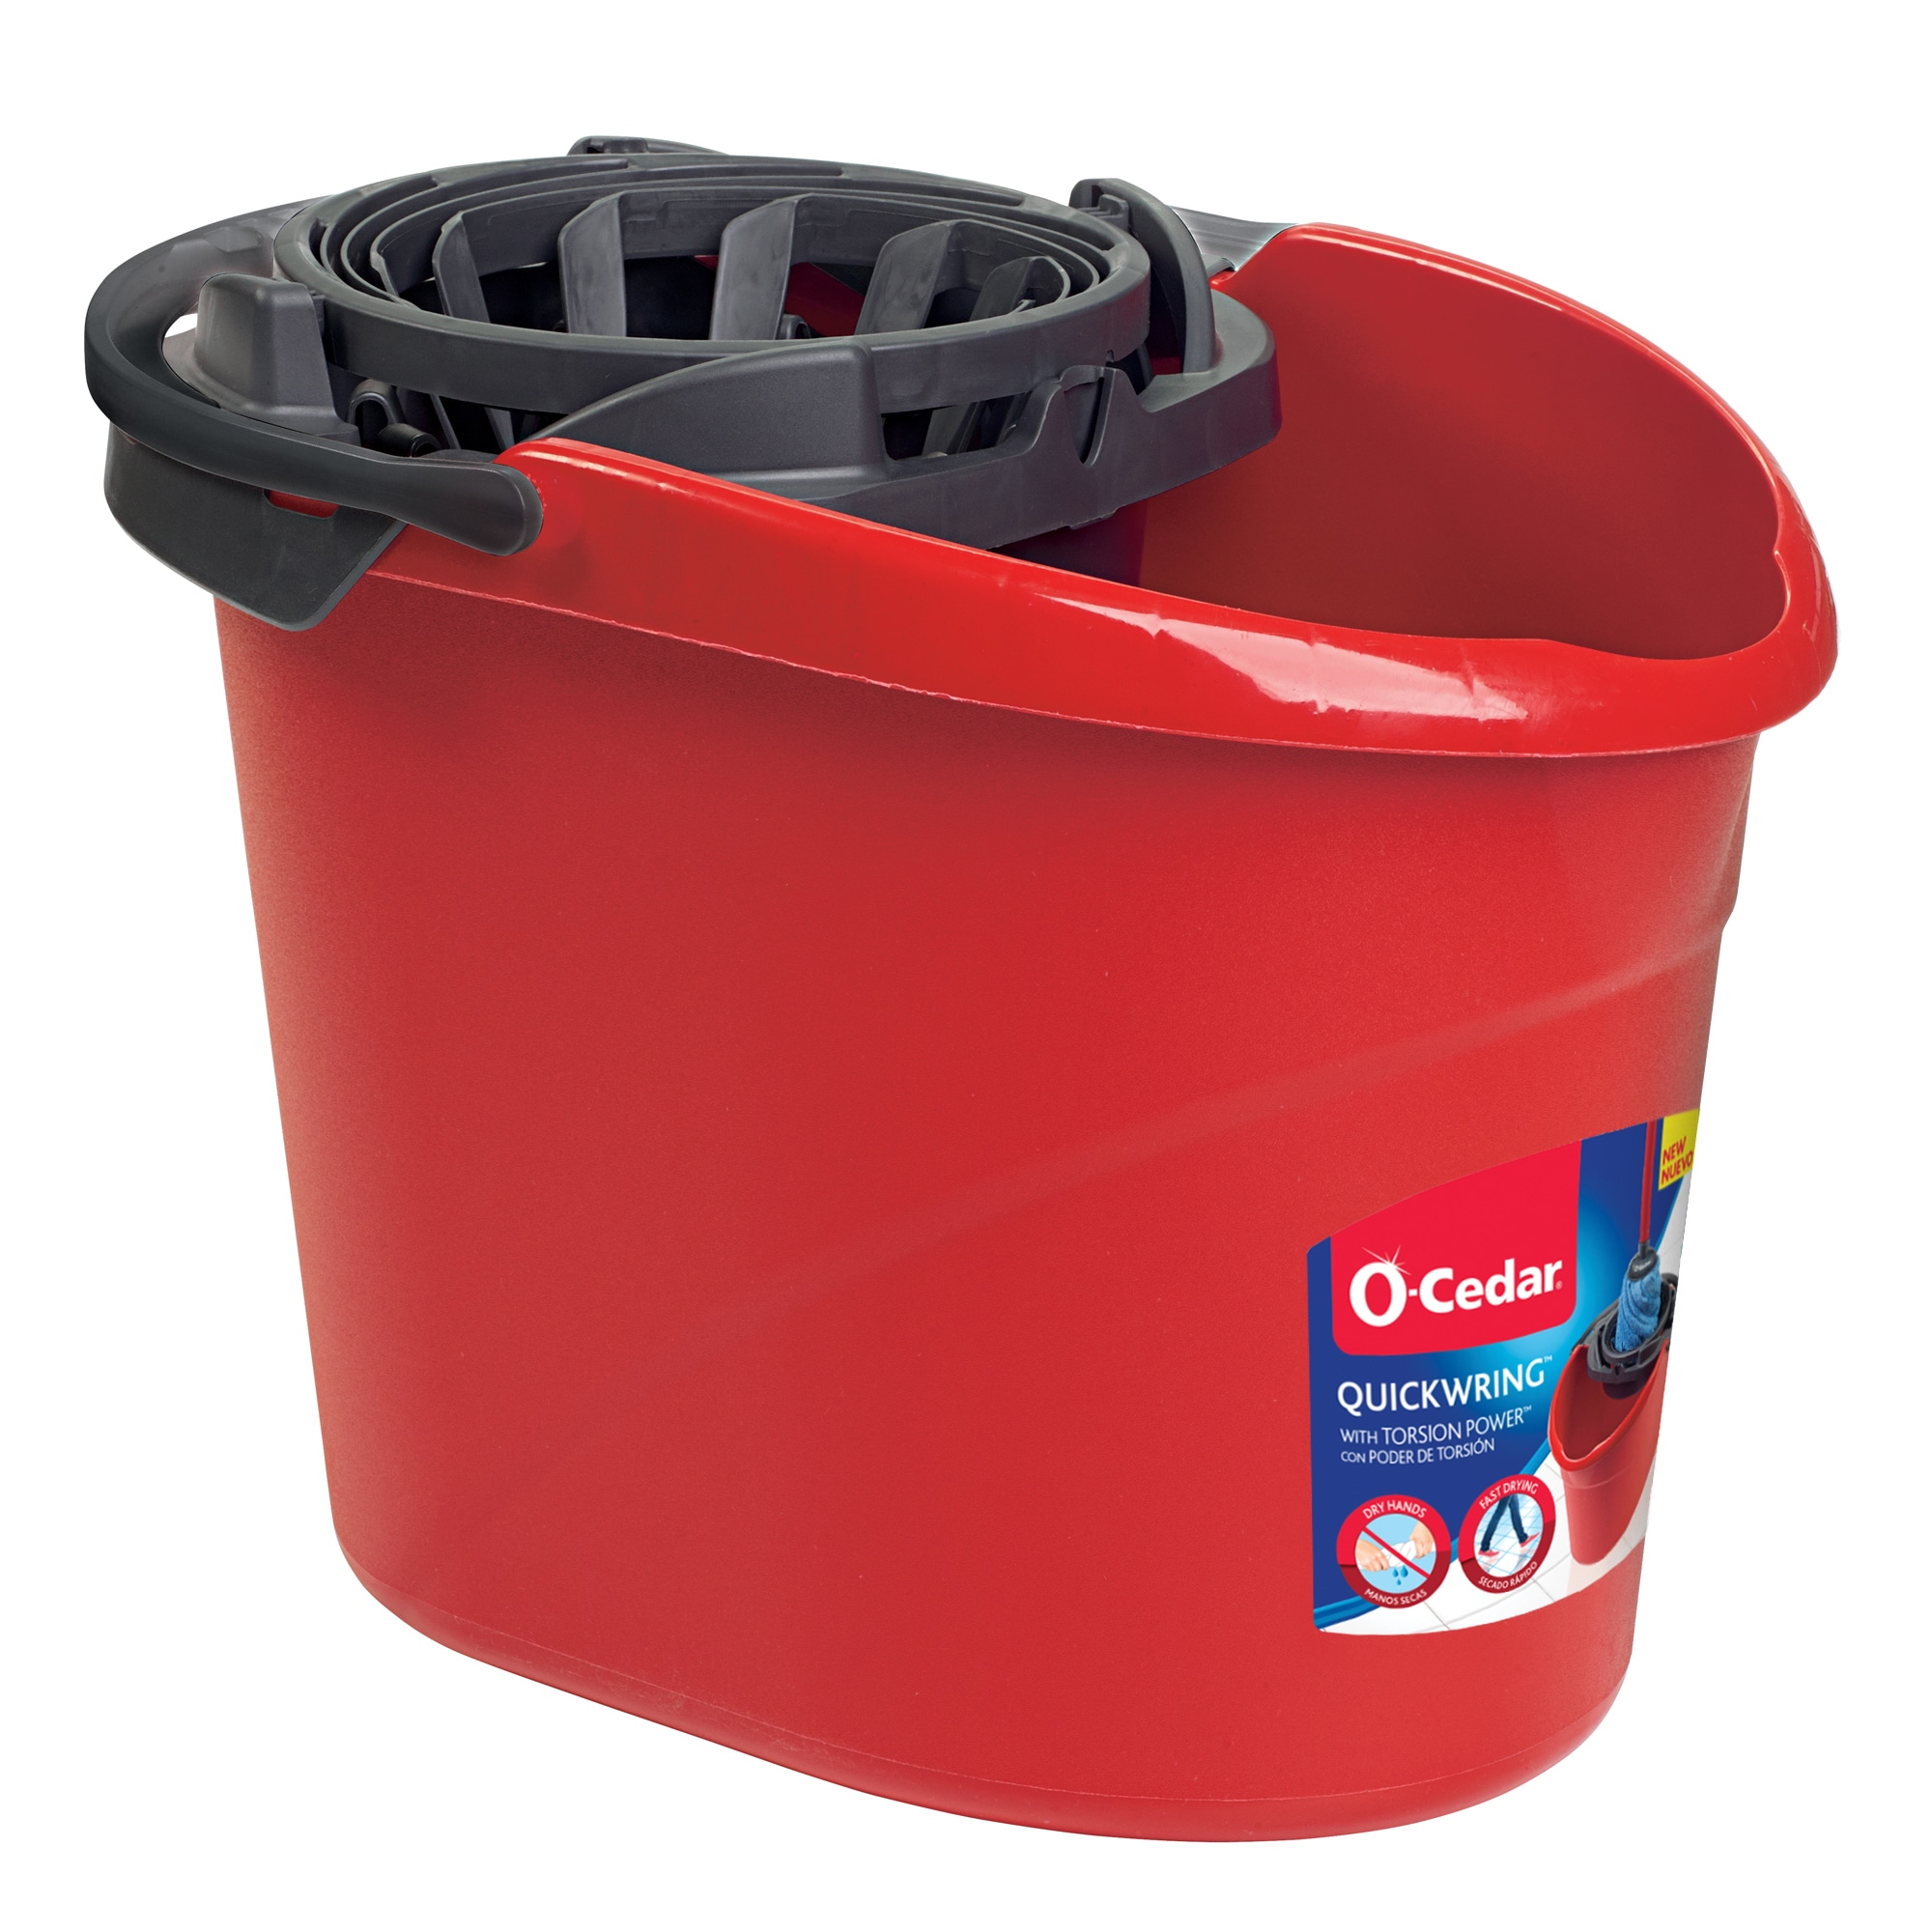  O-Cedar EasyWring Microfiber Spin Mop, Bucket Floor Cleaning  System, Red, Gray : Everything Else